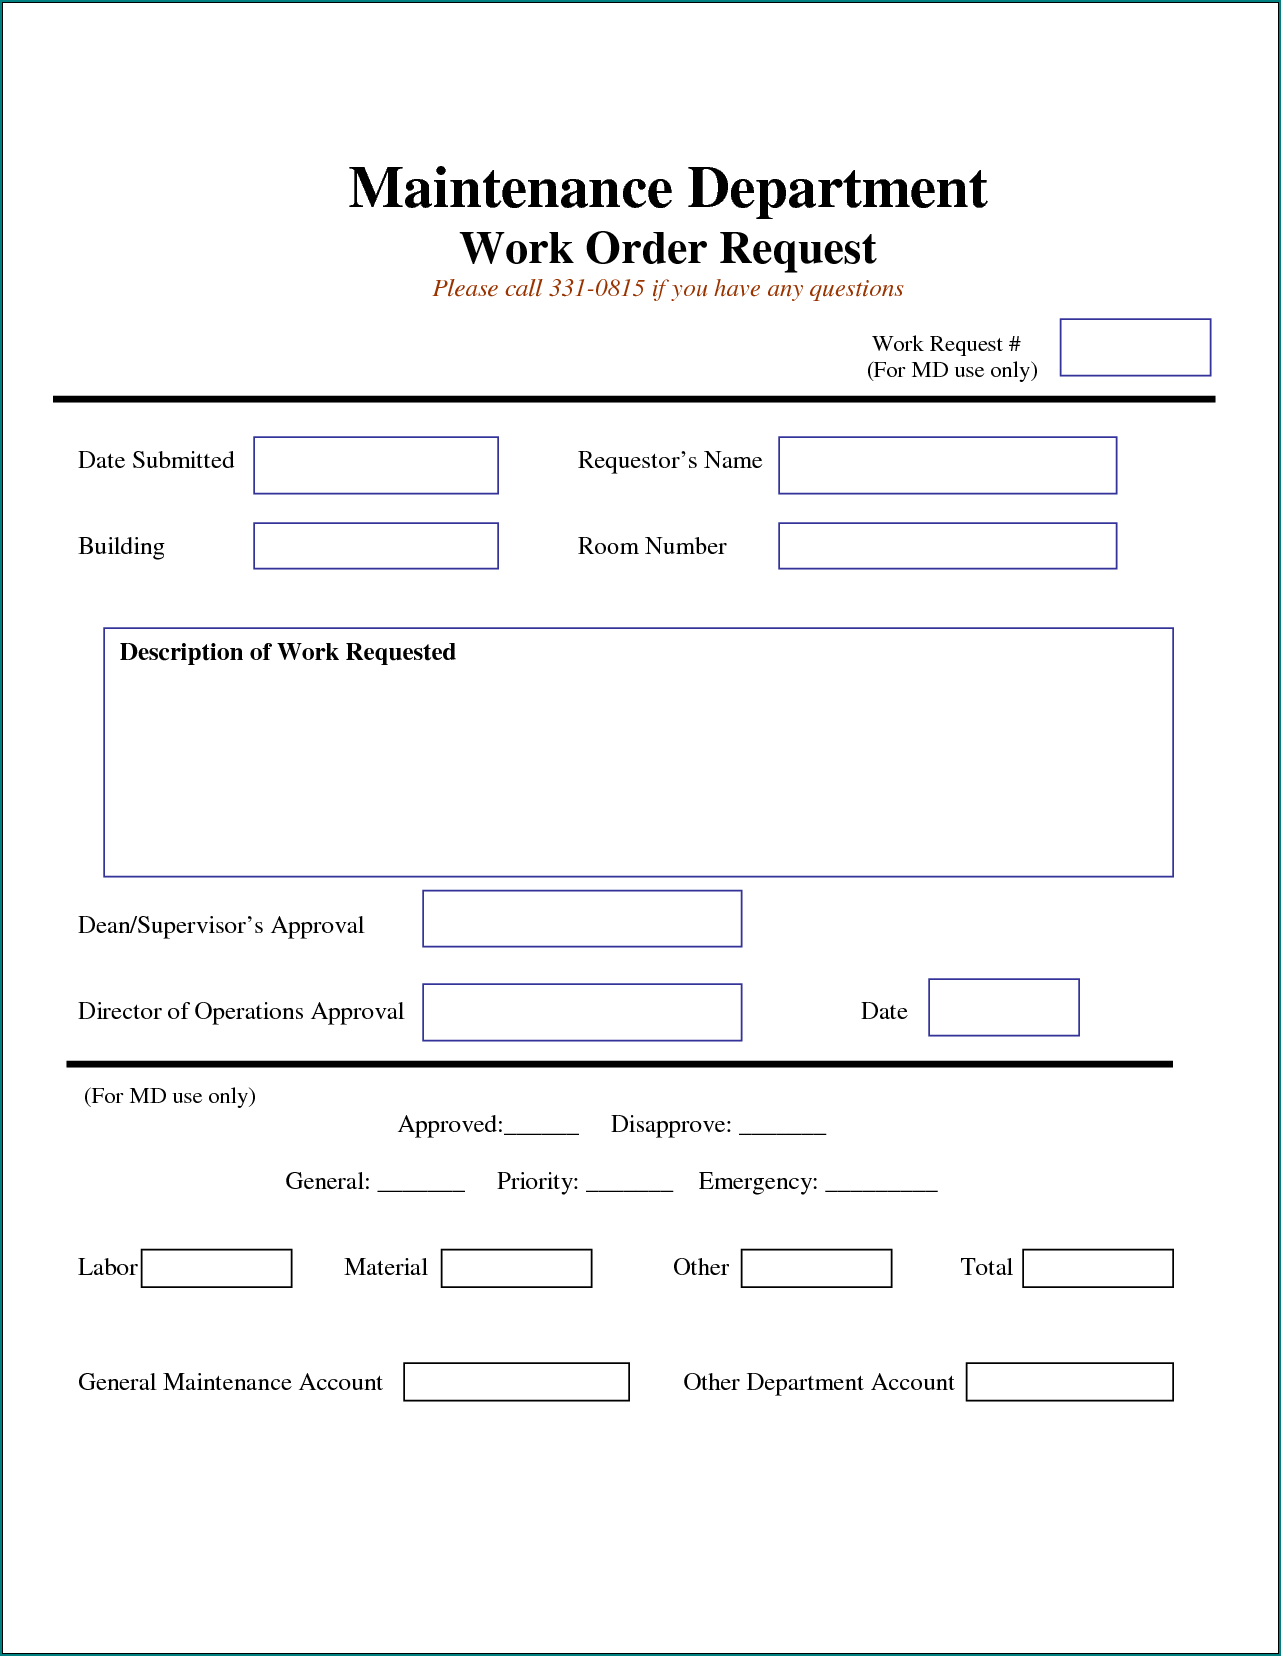 Example of Maintenance Work Order Template